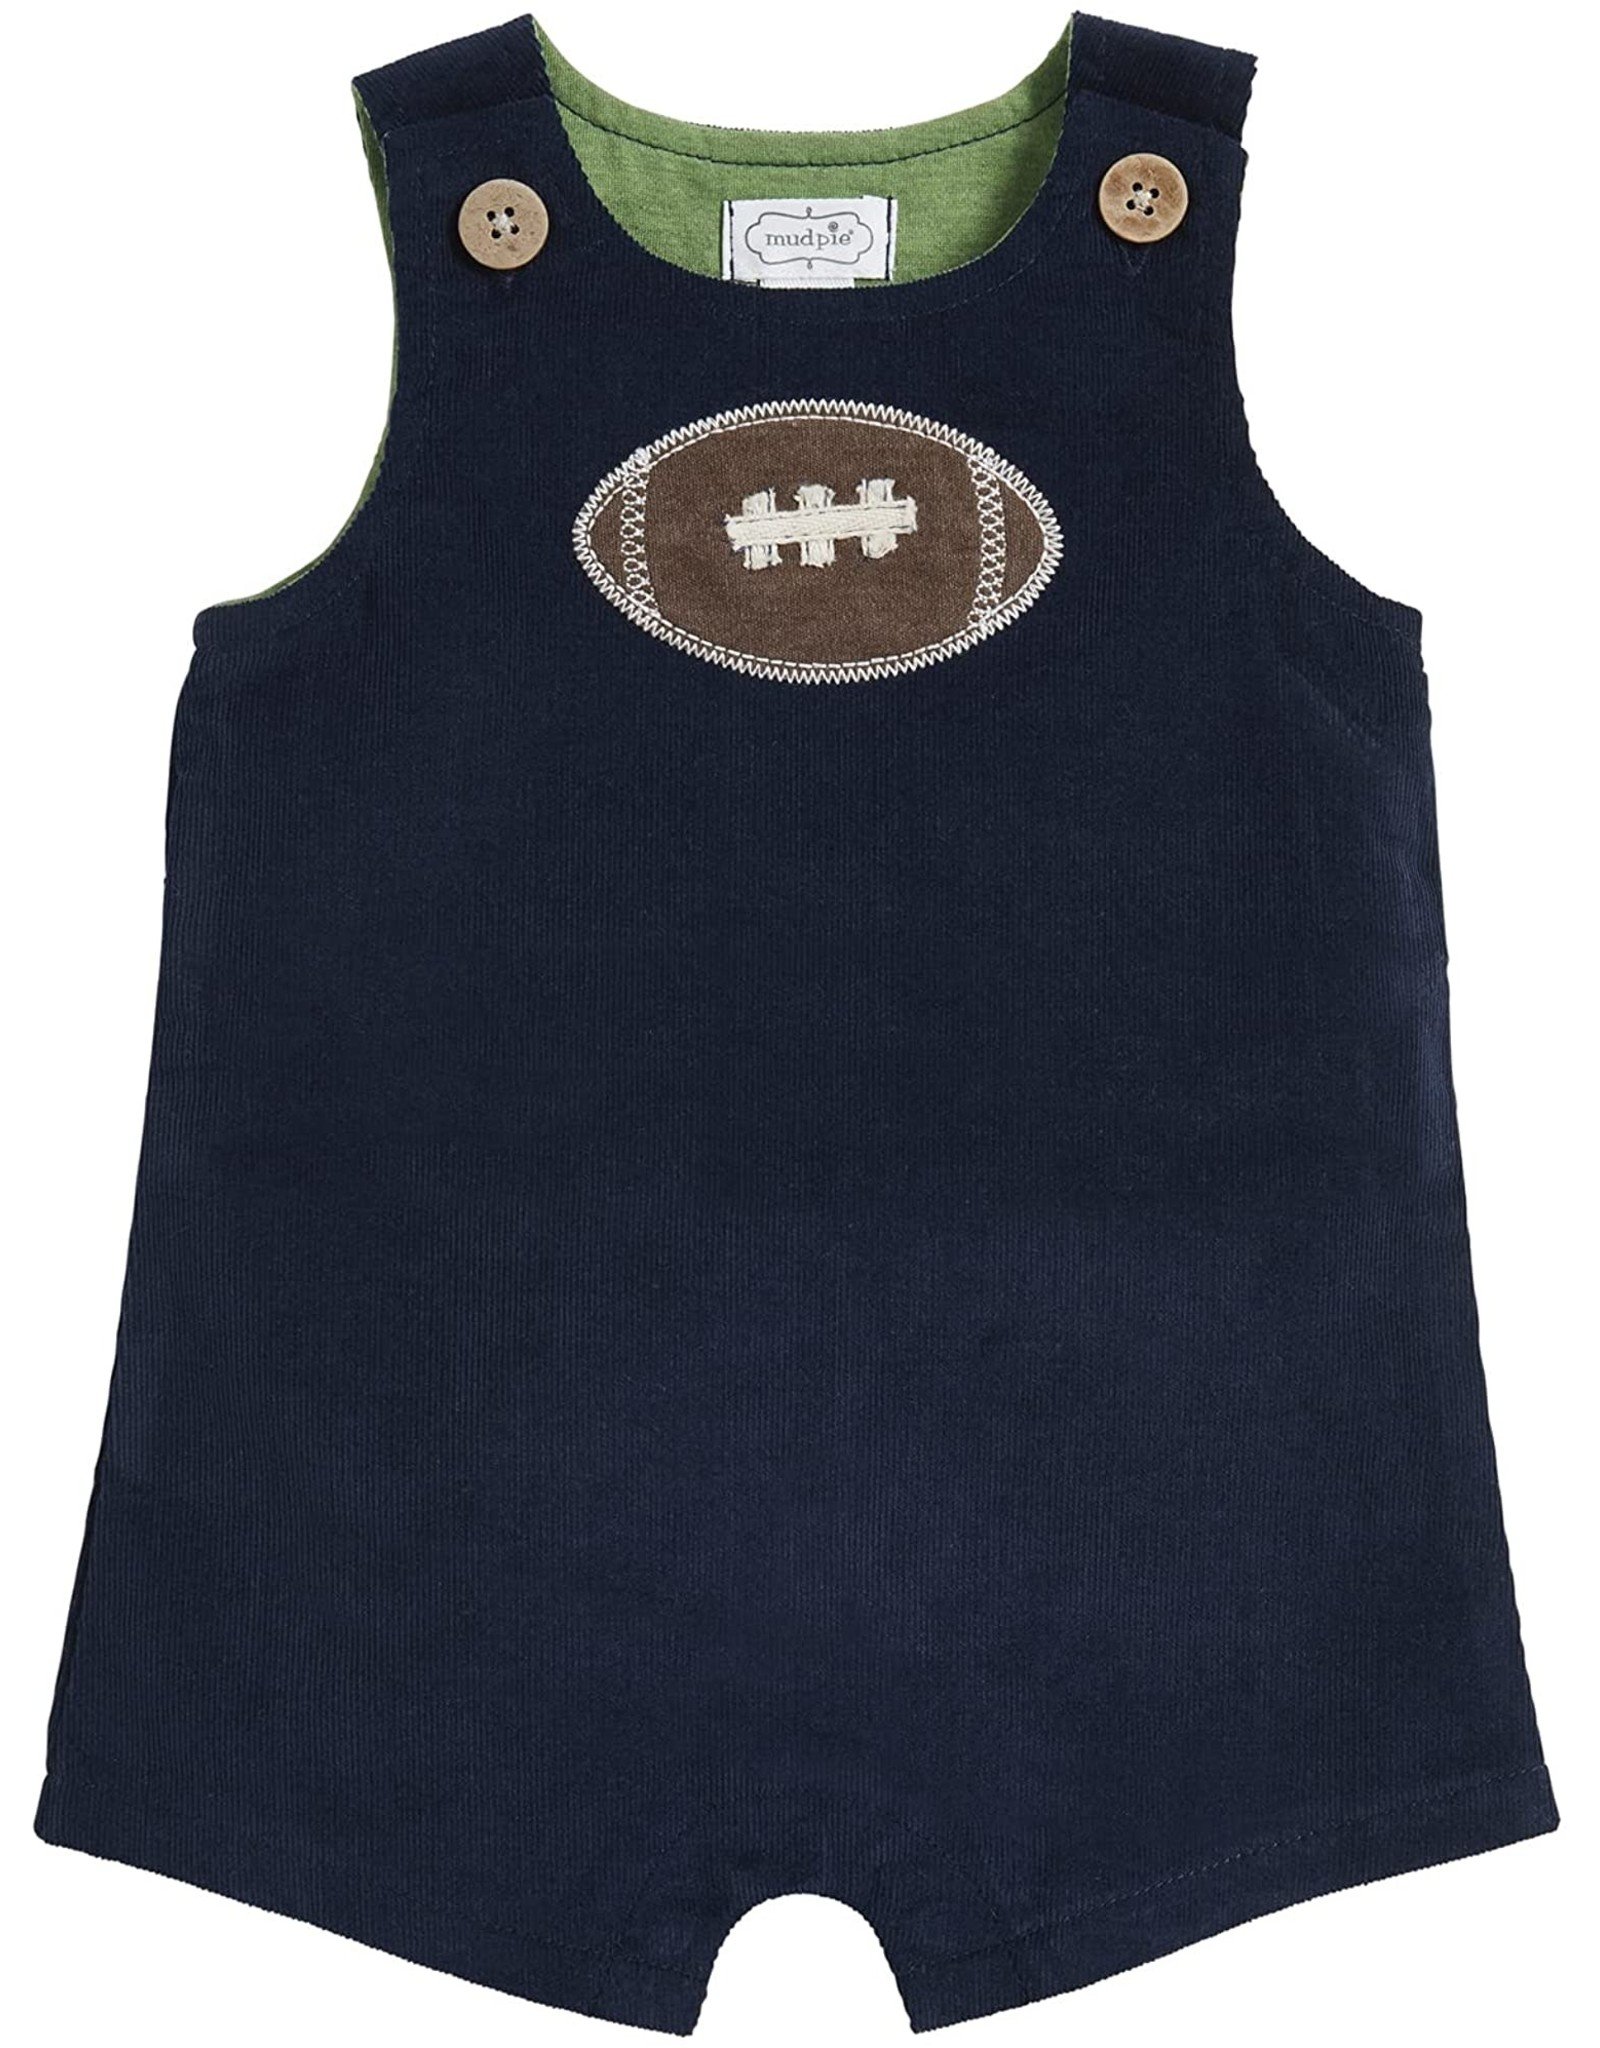 Mud Pie Baby N Kids Clothing One-Piece Football Shortall 0-3 Months